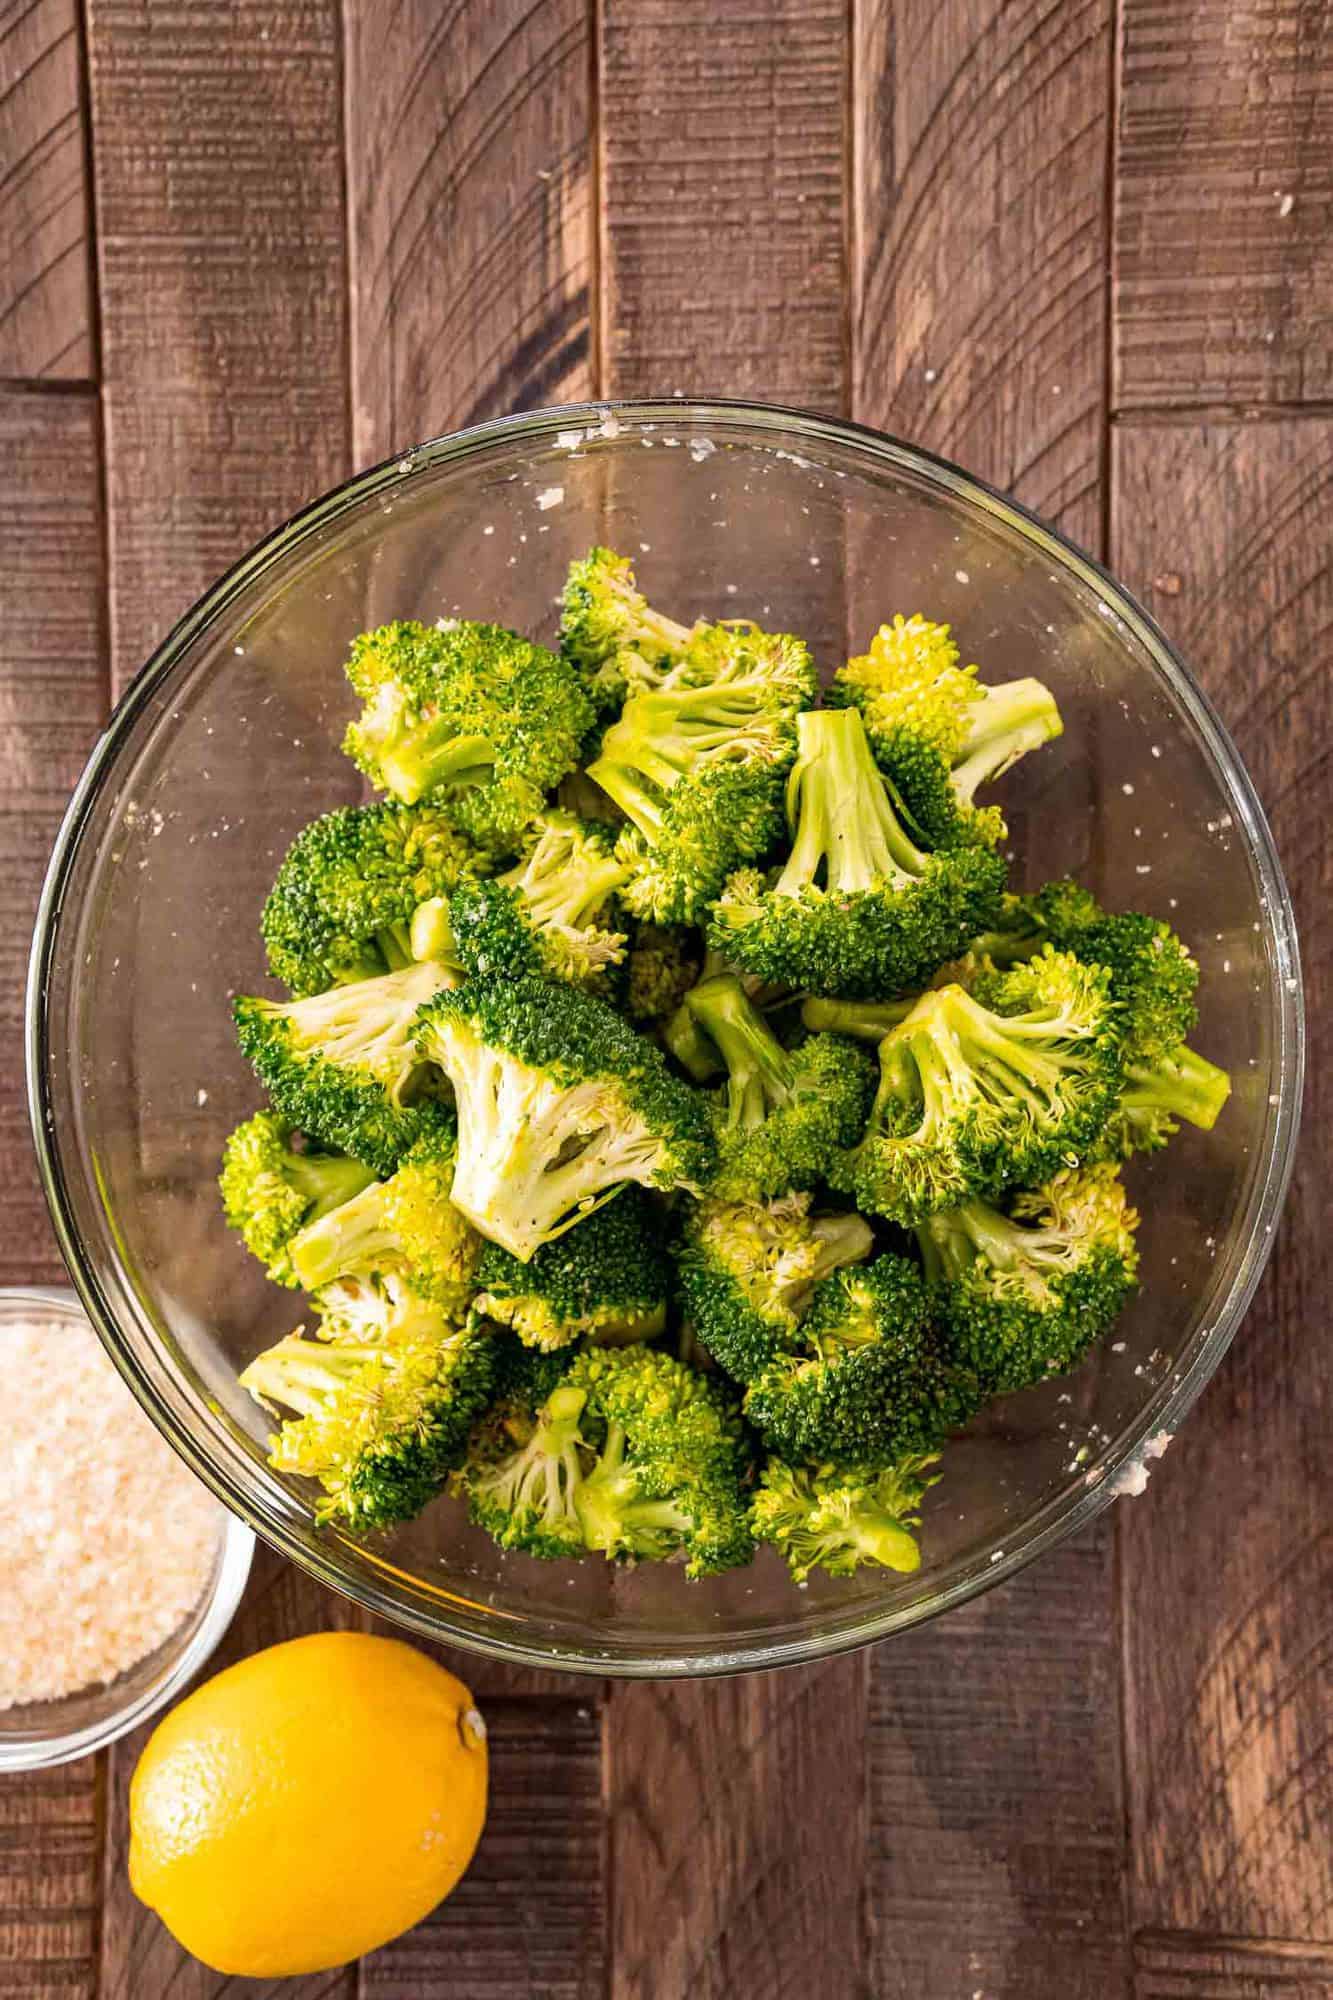 Broccoli in a bowl, white background.